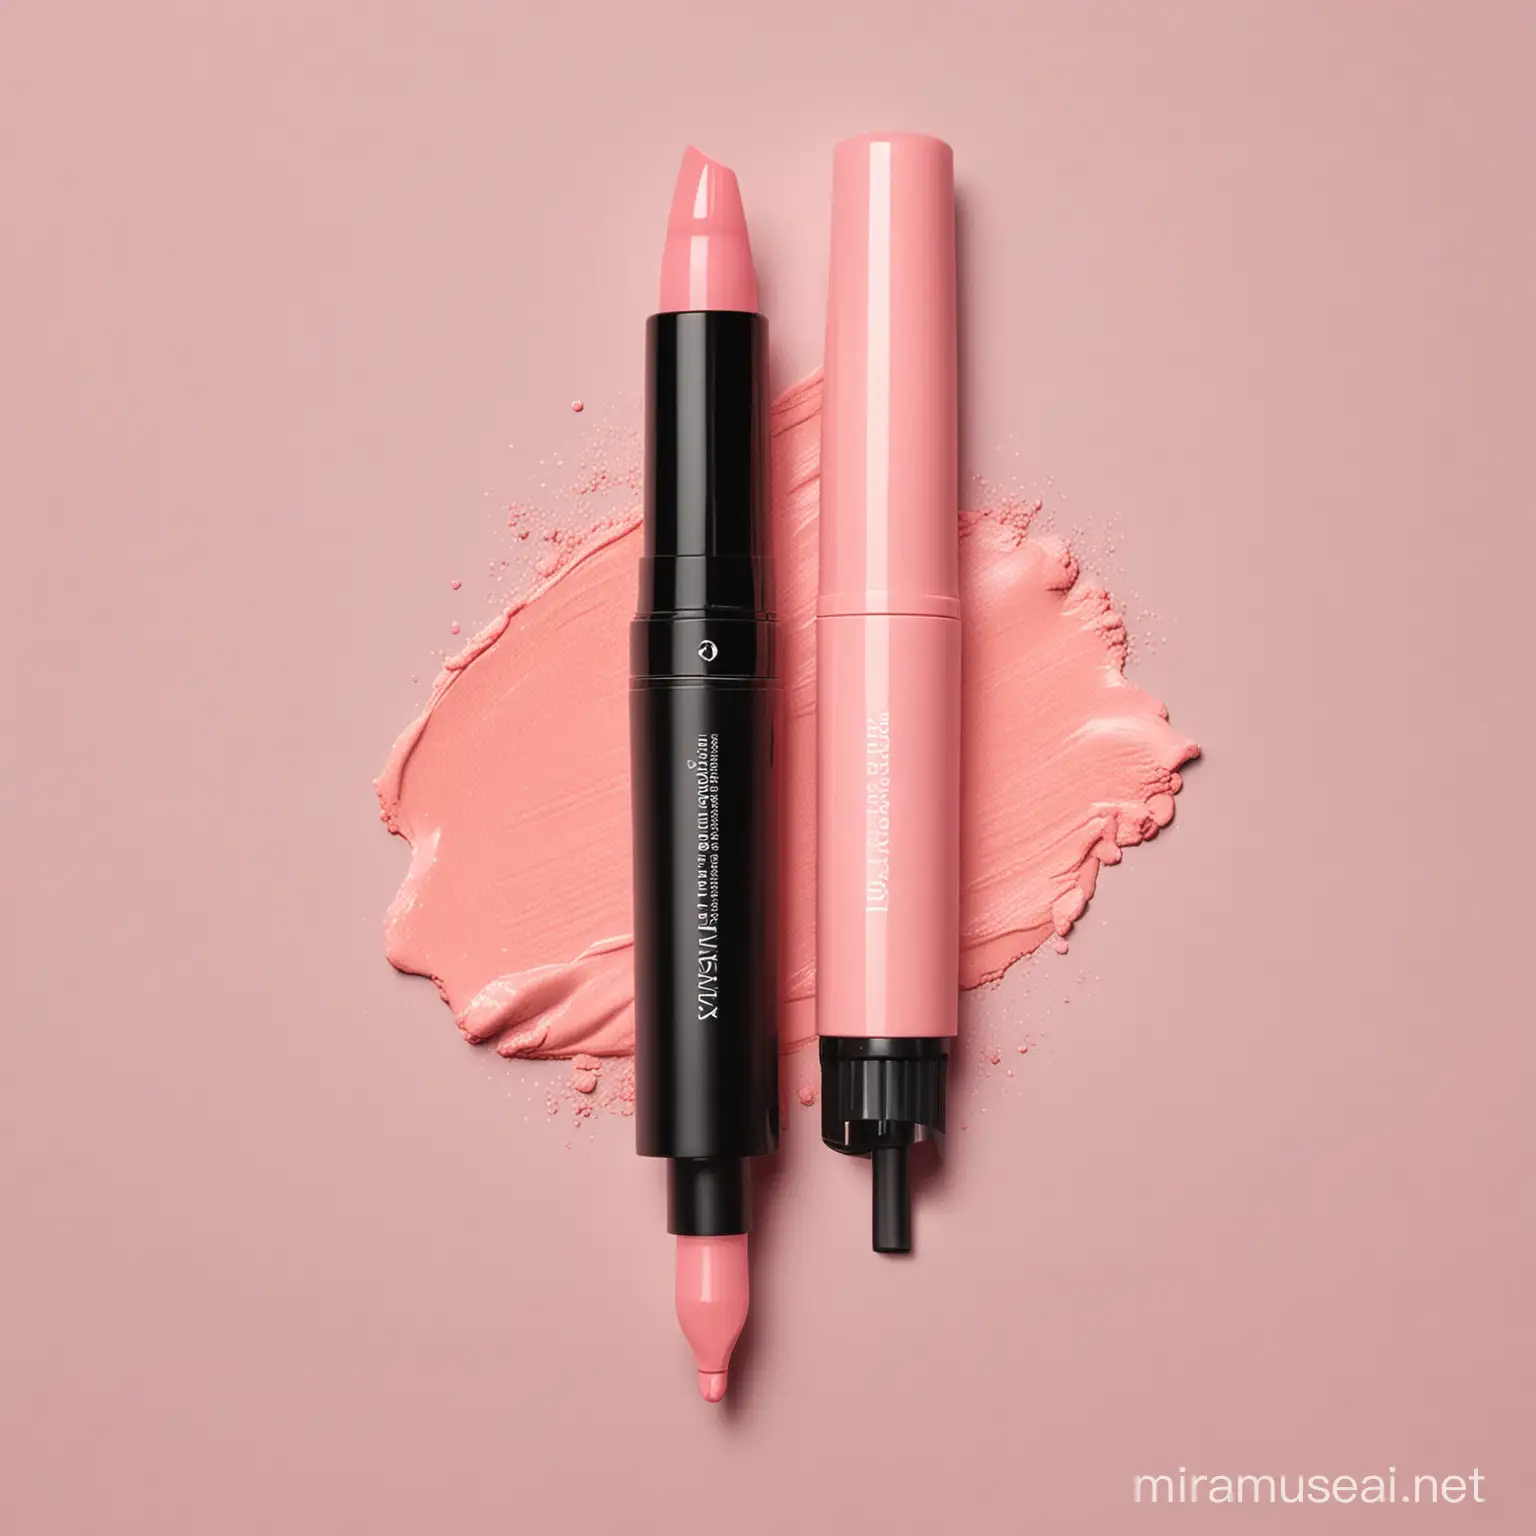 Multifunctional Makeup Pen Prototype with Highlighter Blusher and Foundation